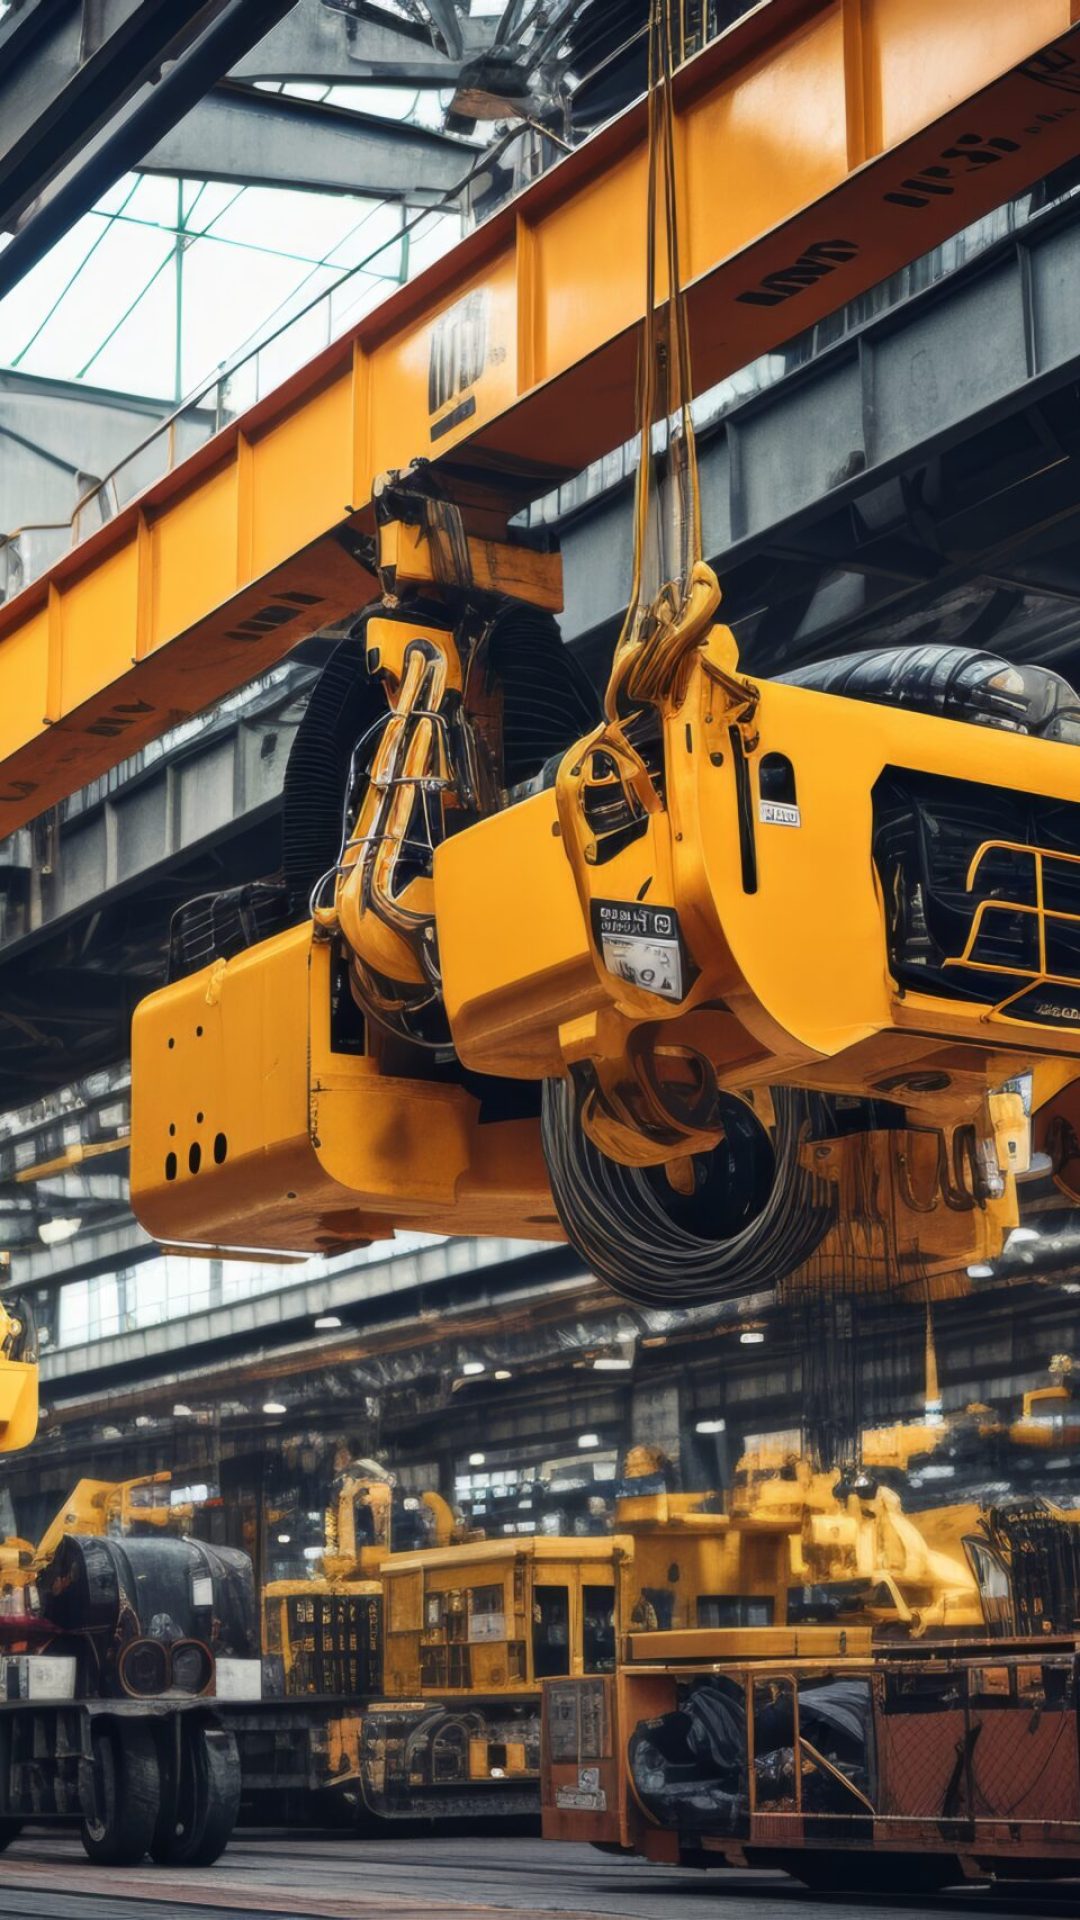 A Massive Overhead Crane Hook Suspended in Mid-Air at a Bustling Industrial Site, Symbolizing the Power of Heavy Machinery